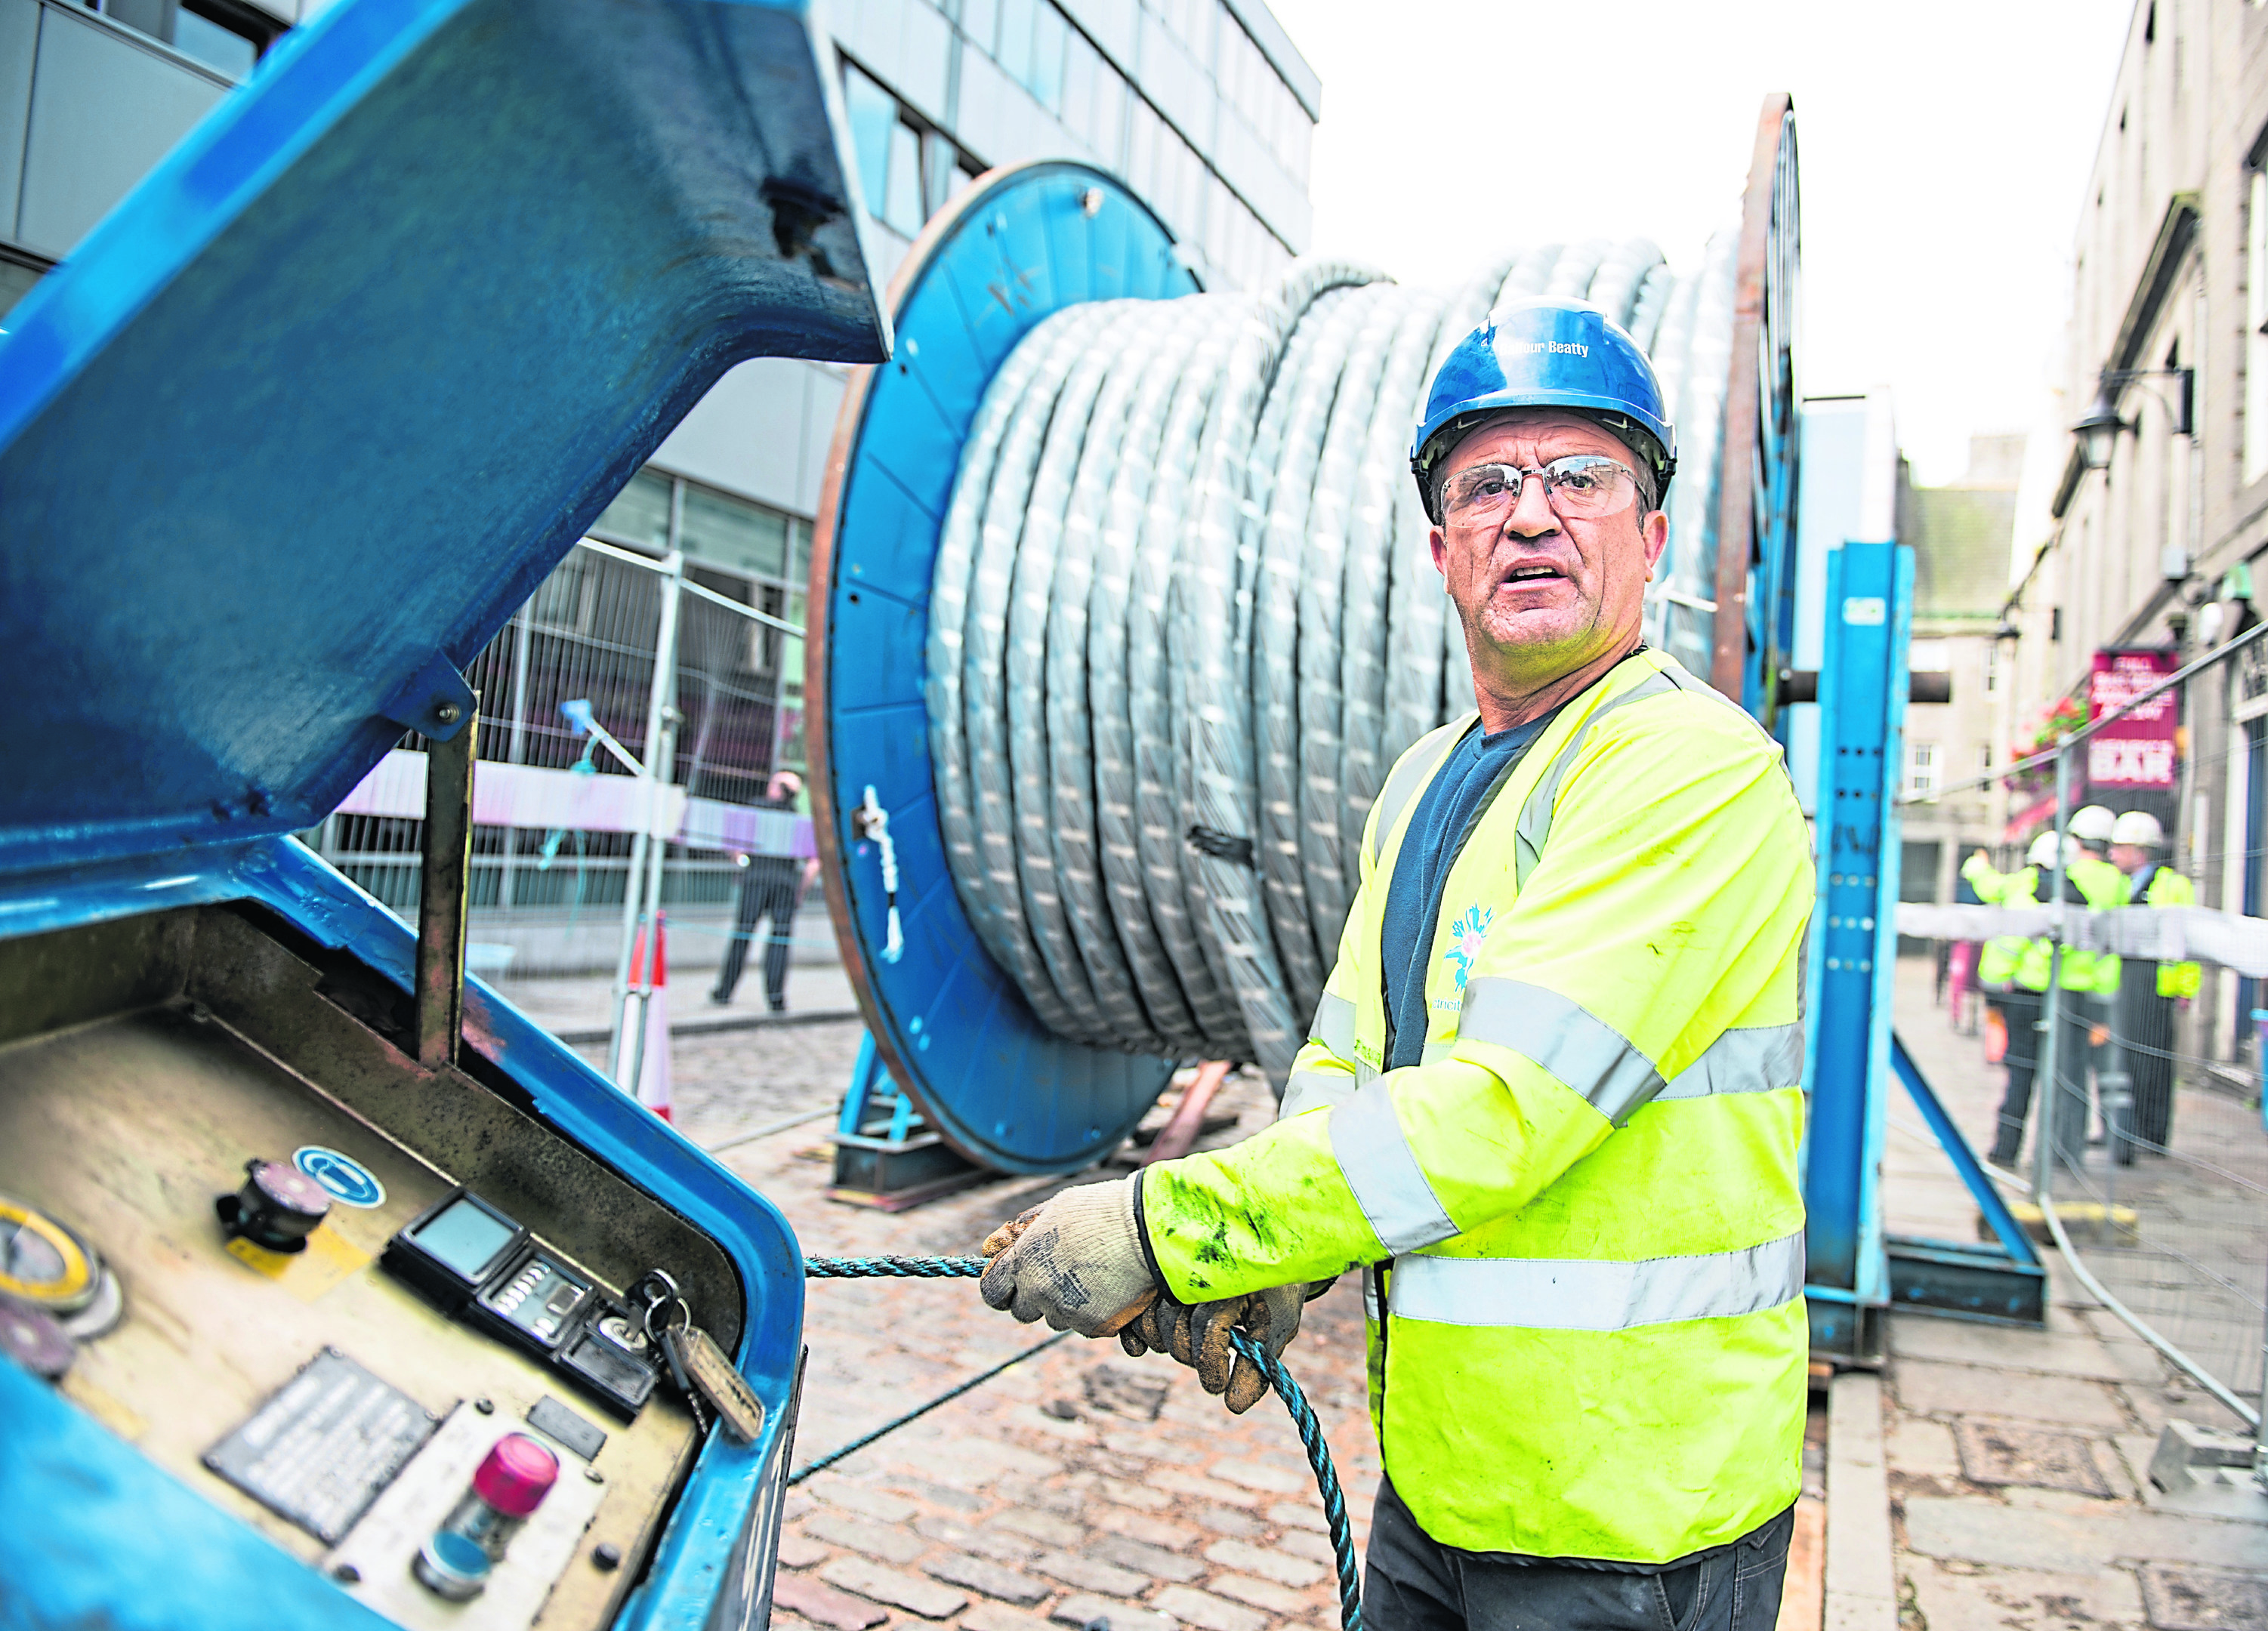 Balfour Beatty will deliver cabling expertise for the project
City Cable Aberdeen project